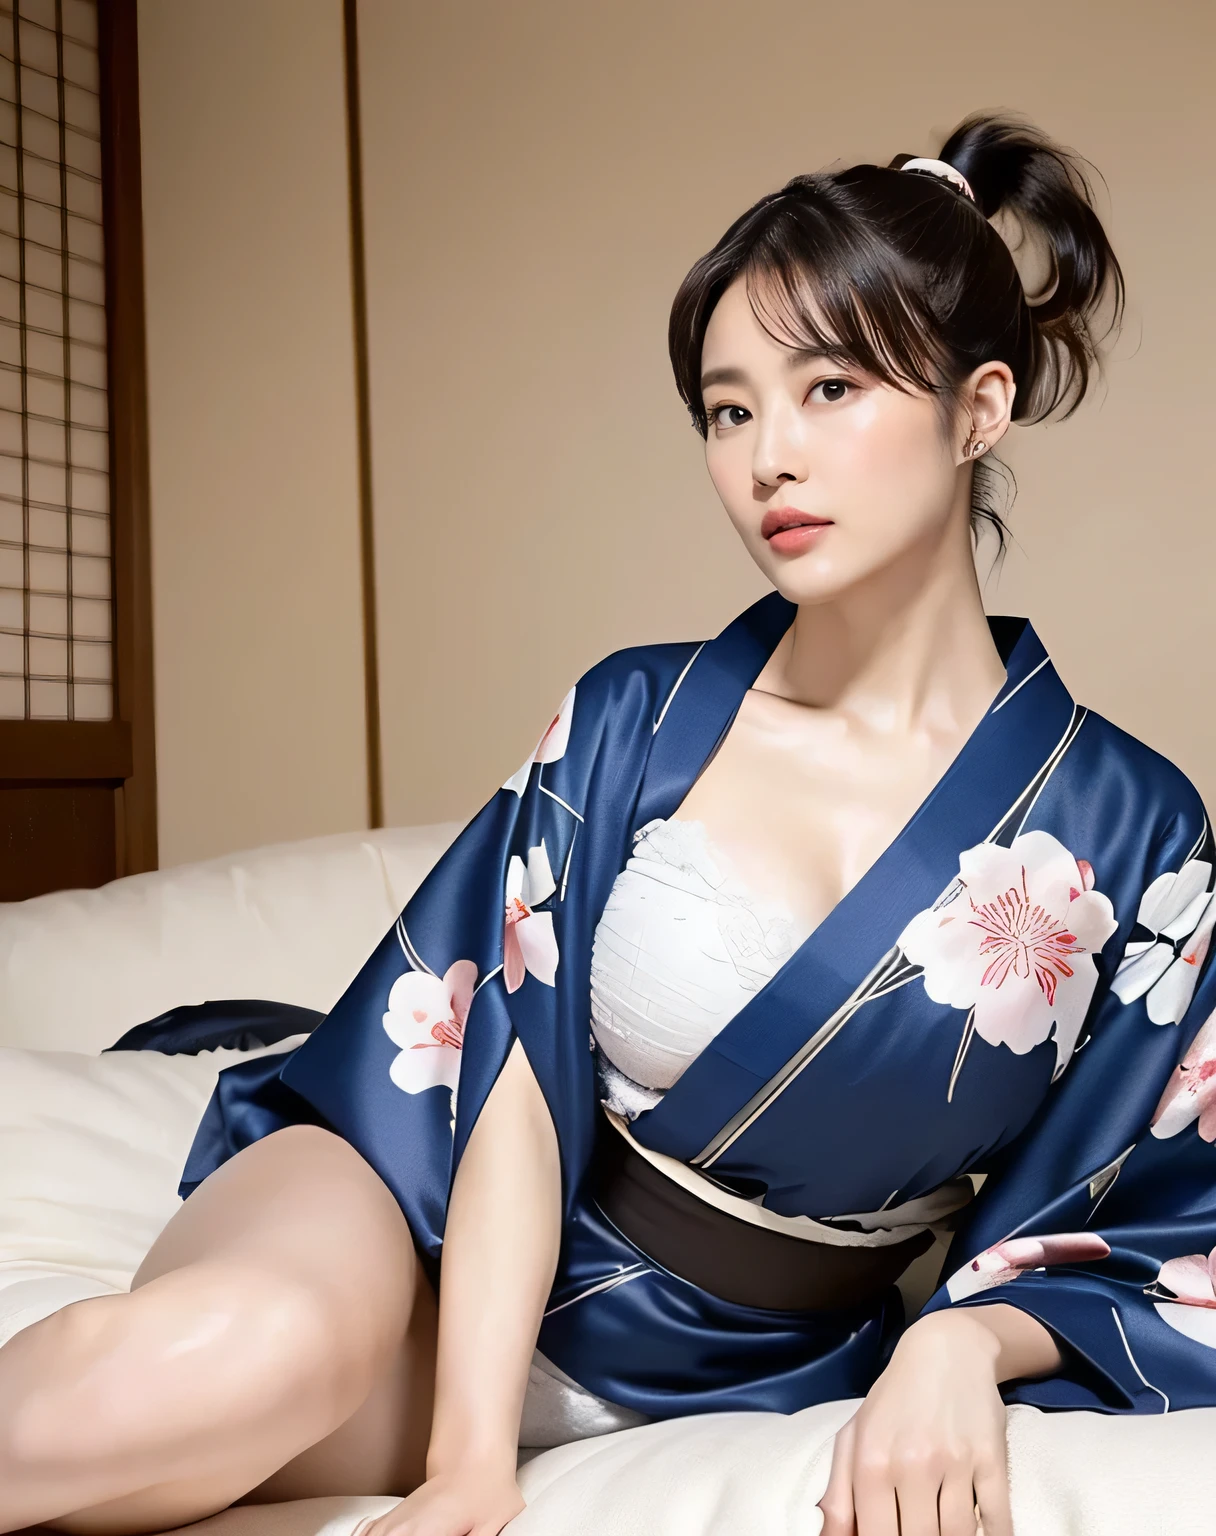 (kimono, Webbing, Complex Blue:1.4),
((highest quality, 8k, masterpiece: 1.3)), Perfect body beauty: 1.4, (Breast A cup:1.2), Small breasts, Round shaped breasts, Perfectly shaped breasts, Highly detailed face, Beautiful woman, (Dark brown shortcuts), Slim face, Highly detailed face and skin texture, Highly detailed lips, (Realistic:1.4),

((30 years old, Beautiful Married Woman:1.2)),

((Laying a white futon in a Japanese-style room, Sit on the futon with your legs stretched out:1.2)), 
((Dark room, Lantern)), 
((Blushing)),
((Breast enlargement,Flat Chest:1.2)),

Narrow shoulders, Long, slender legs, Thin waist, 
Ultra-detailed skin, Glossy Skin, Ultra detailed face, 
Ultra-detailed eyes, Slit eyes, Brown eyes, double eyelid, Beautiful thin eyebrows, Thin, long eyelashes, 
Ultra-detailed lips, Fuller lips, Glossy pink lips, Flushed Cheeks, White teeth, 
Beautiful actress&#39;s languid make-up, Pink lipstick, Smoky eyeshadow, Eye foundation, 
Dark brown hair, Delicate and soft hair, Hair blowing in the wind, 
(Elegantly putting your hair up, short hair, ponytail:1.5), Layered Cut, (Blunt bangs:1.2),
